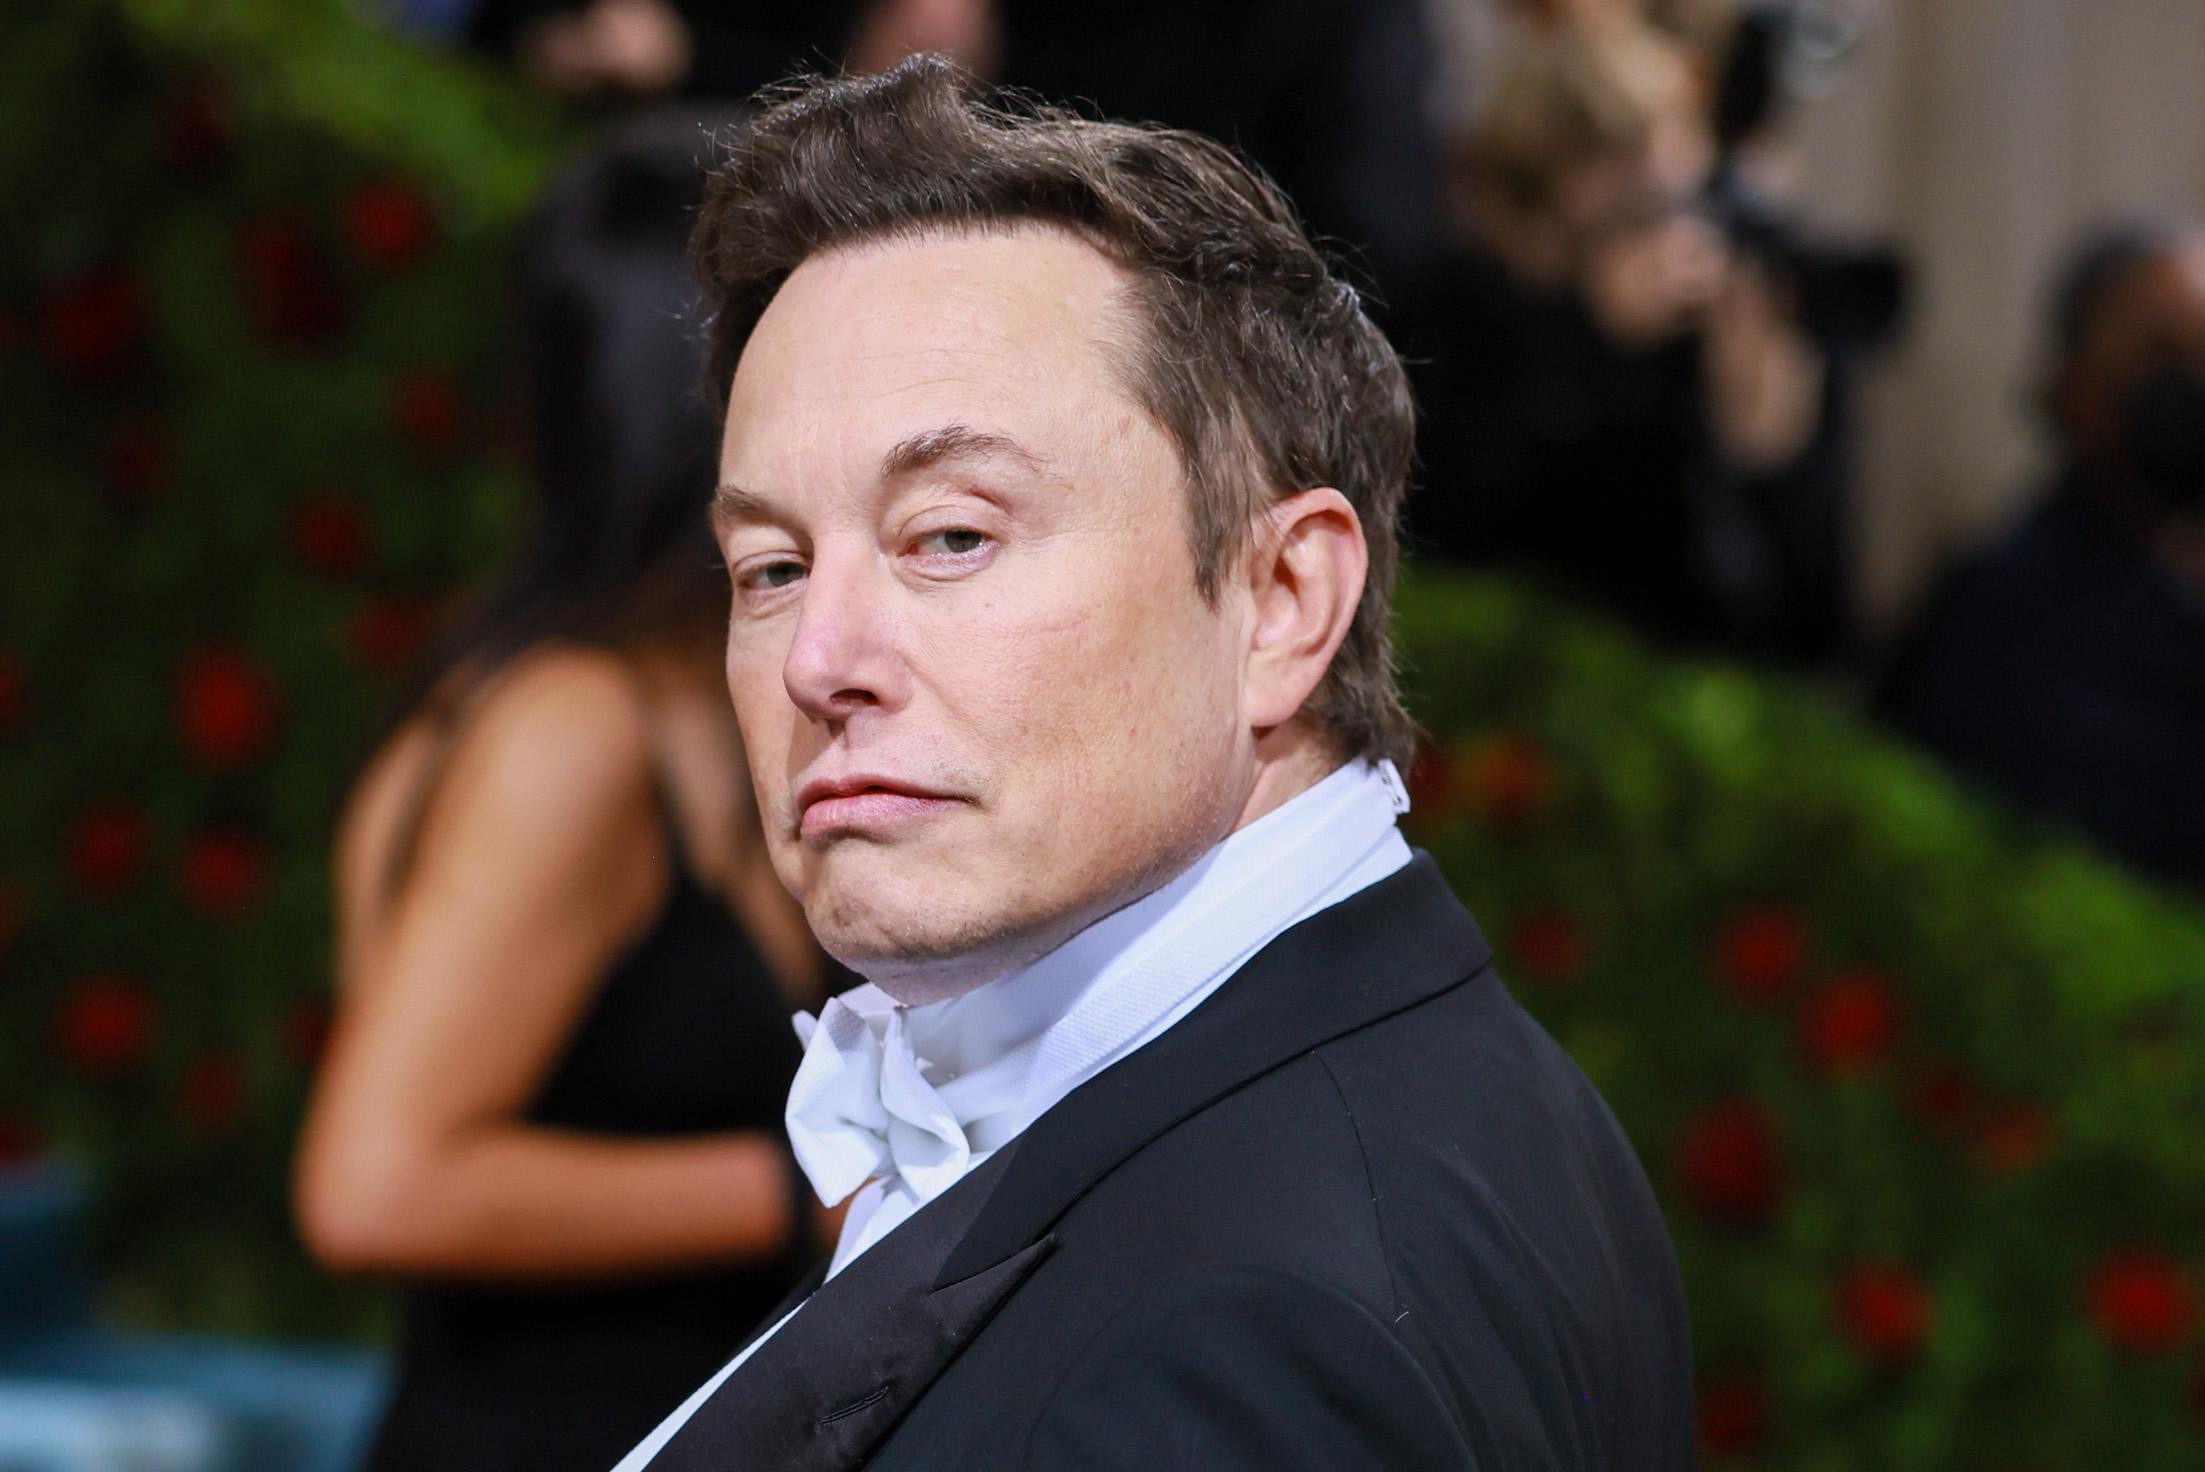 Elon Musk is enraged that Tesla has been removed from the sustainability index: “Scam”